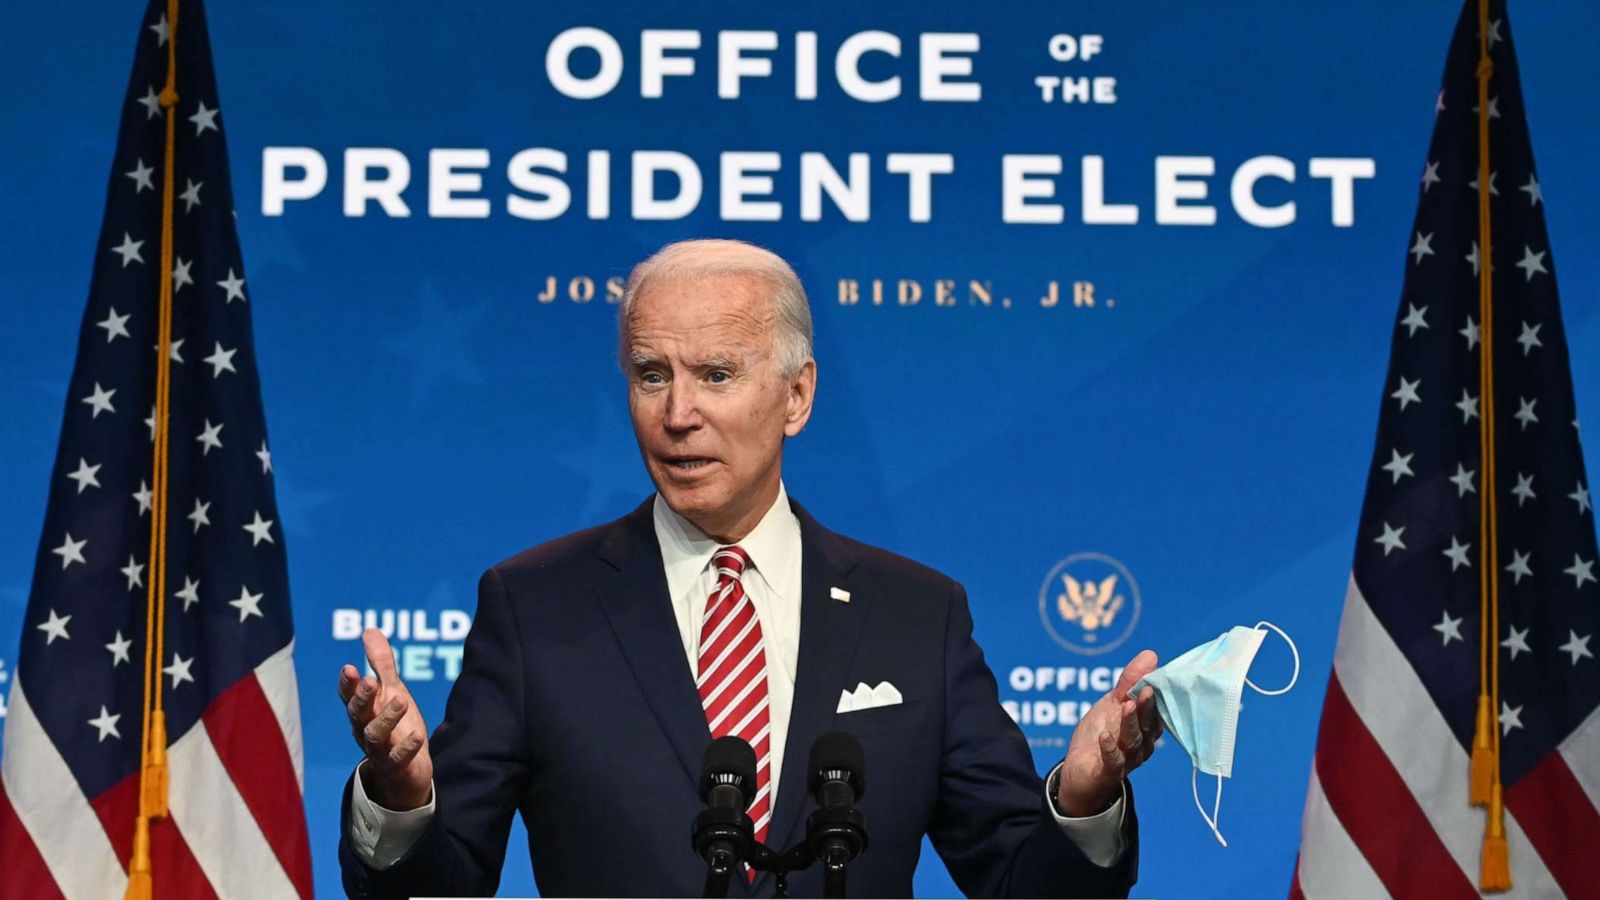 President Elect Joe Biden's Top Level Appointees And Cabinet Picks